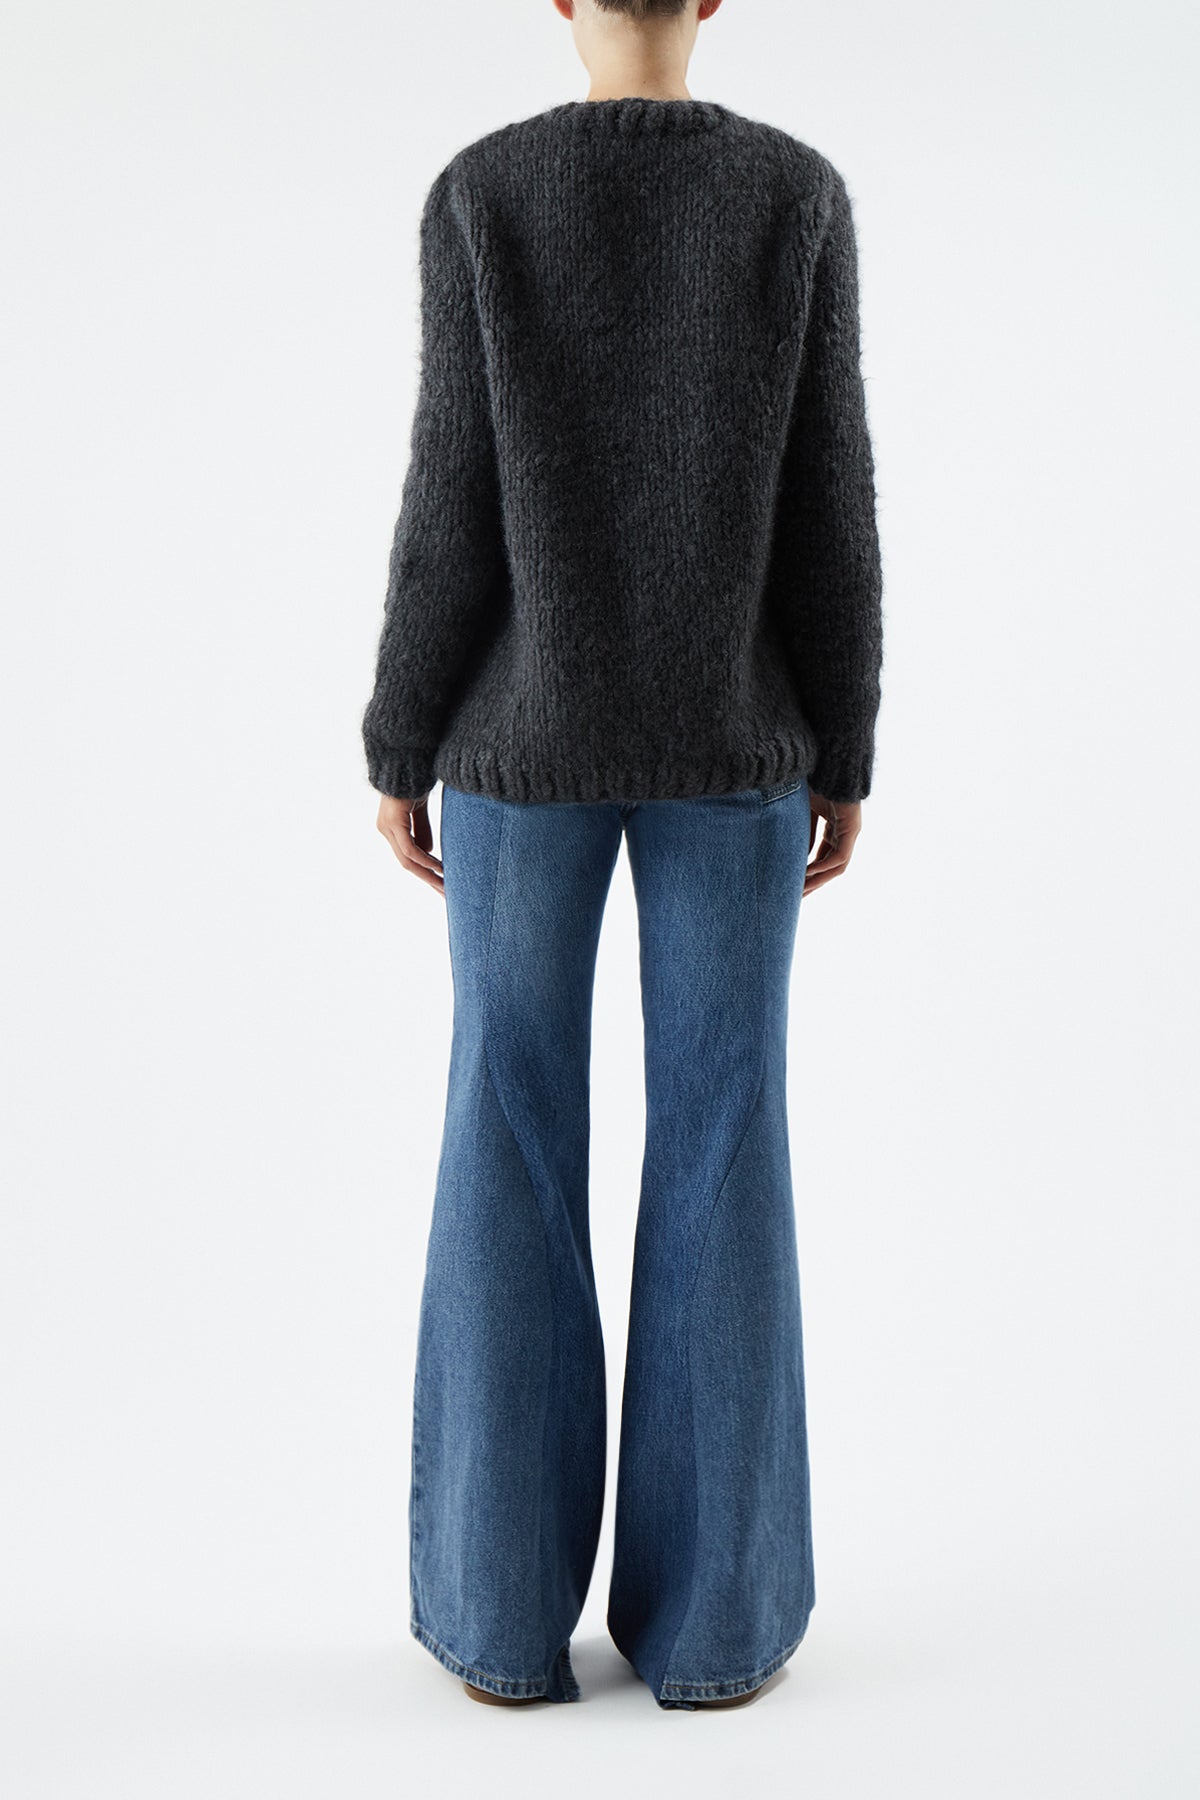 Clarissa Knit Sweater in Charcoal Welfat Cashmere